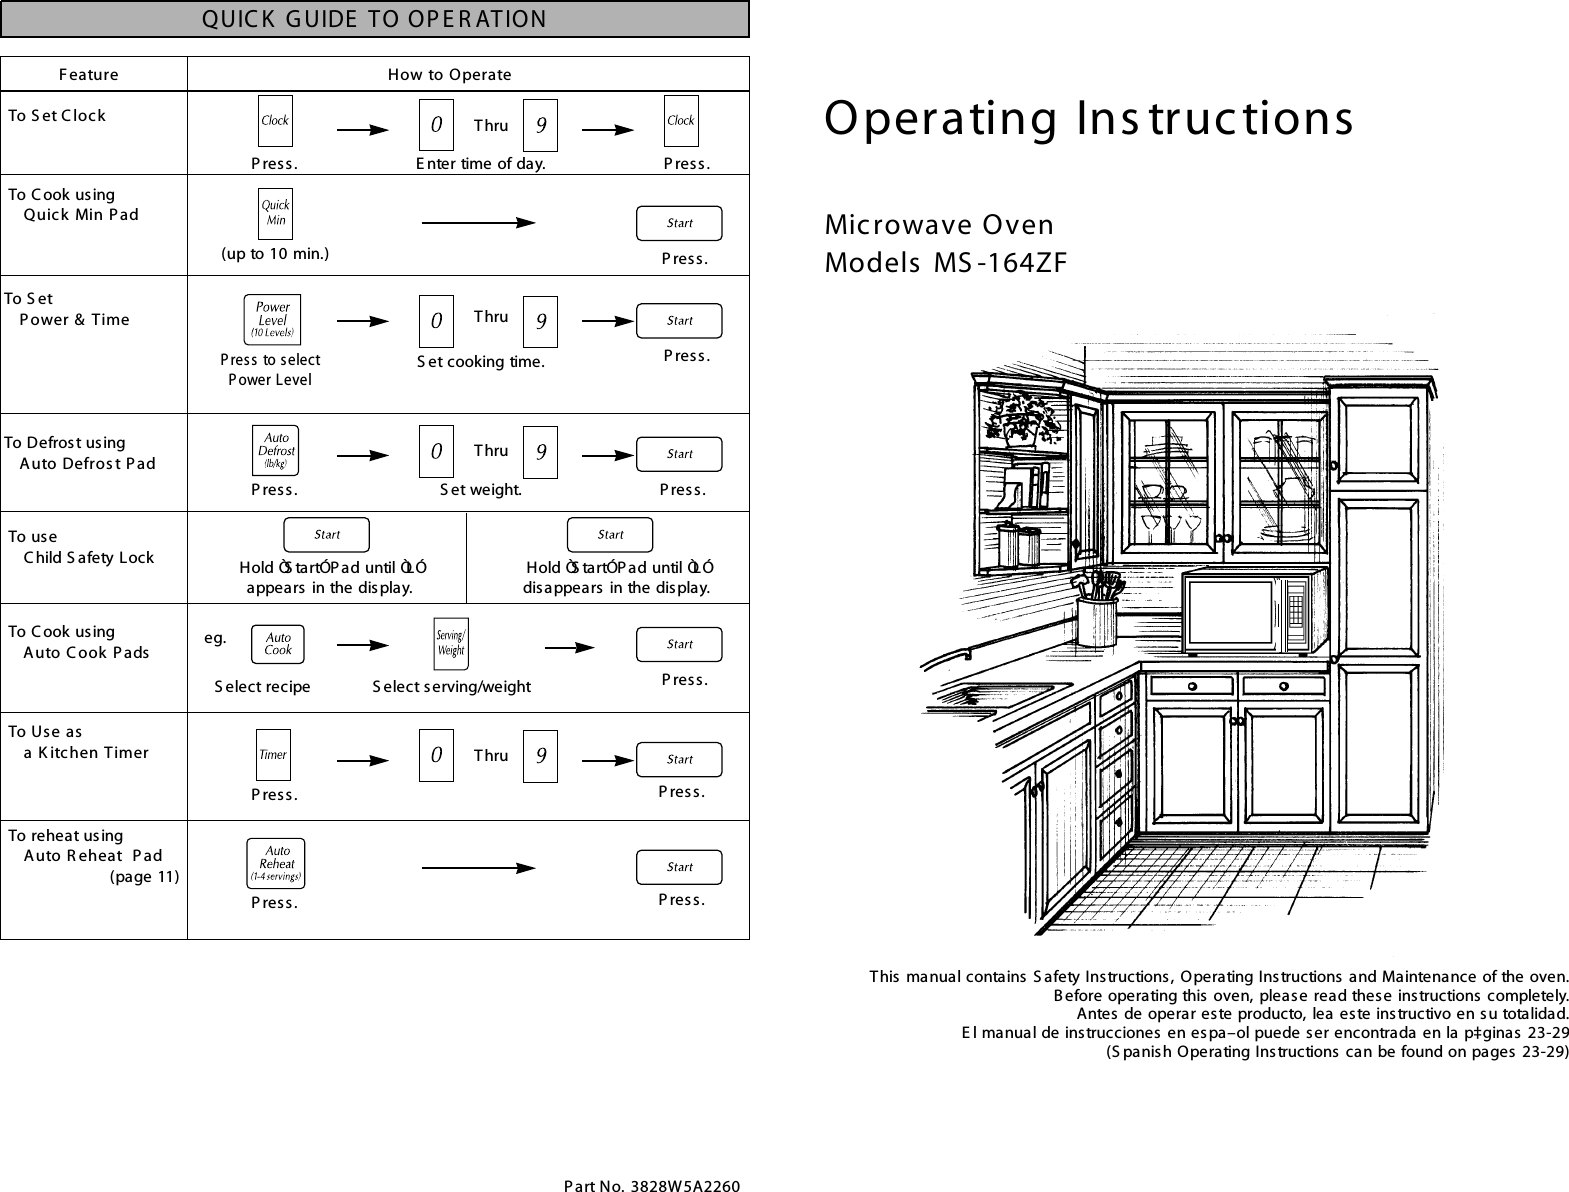 Operating Ins tructionsMicrowave OvenModels  MS -164ZFThis manual contains S afety Instructions, Operating Instructions and Maintenance of the oven.Before operating this oven, please read these instructions completely.Antes de operar este producto, lea este instructivo en su totalidad.E l manual de instrucciones en espa–ol puede ser encontrada en la p‡ginas 23-29(S panish Operating Instructions can be found on pages 23-29)Feature How to OperateTo S et C loc kTo C ook usingQuick Min P adTo S etP ower &amp; TimeTo Defrost usingAuto Defros t P adTo Use as a K itchen TimerTo reheat usingAuto R eheat P ad(page 11)E nter time of day.P res s. P res s.(up to 10 min.)P res s. P res s.To C ook usingAuto C ook P adsQUIC K  G UIDE  TO OP E R ATIONP art No. 3828W5A2260S elect recipe S elect serving/weighteg.To  us eC hild S afety Lock Hold ÒS tartÓ P ad until ÒLÓ appears  in the display.Hold ÒS tartÓ P ad until ÒLÓ disappears  in the display.ThruS et weight.P res s. P res s.ThruS et cooking time.P ress to select P ower LevelP res s.ThruThruP res s.P res s.P res s. P res s.